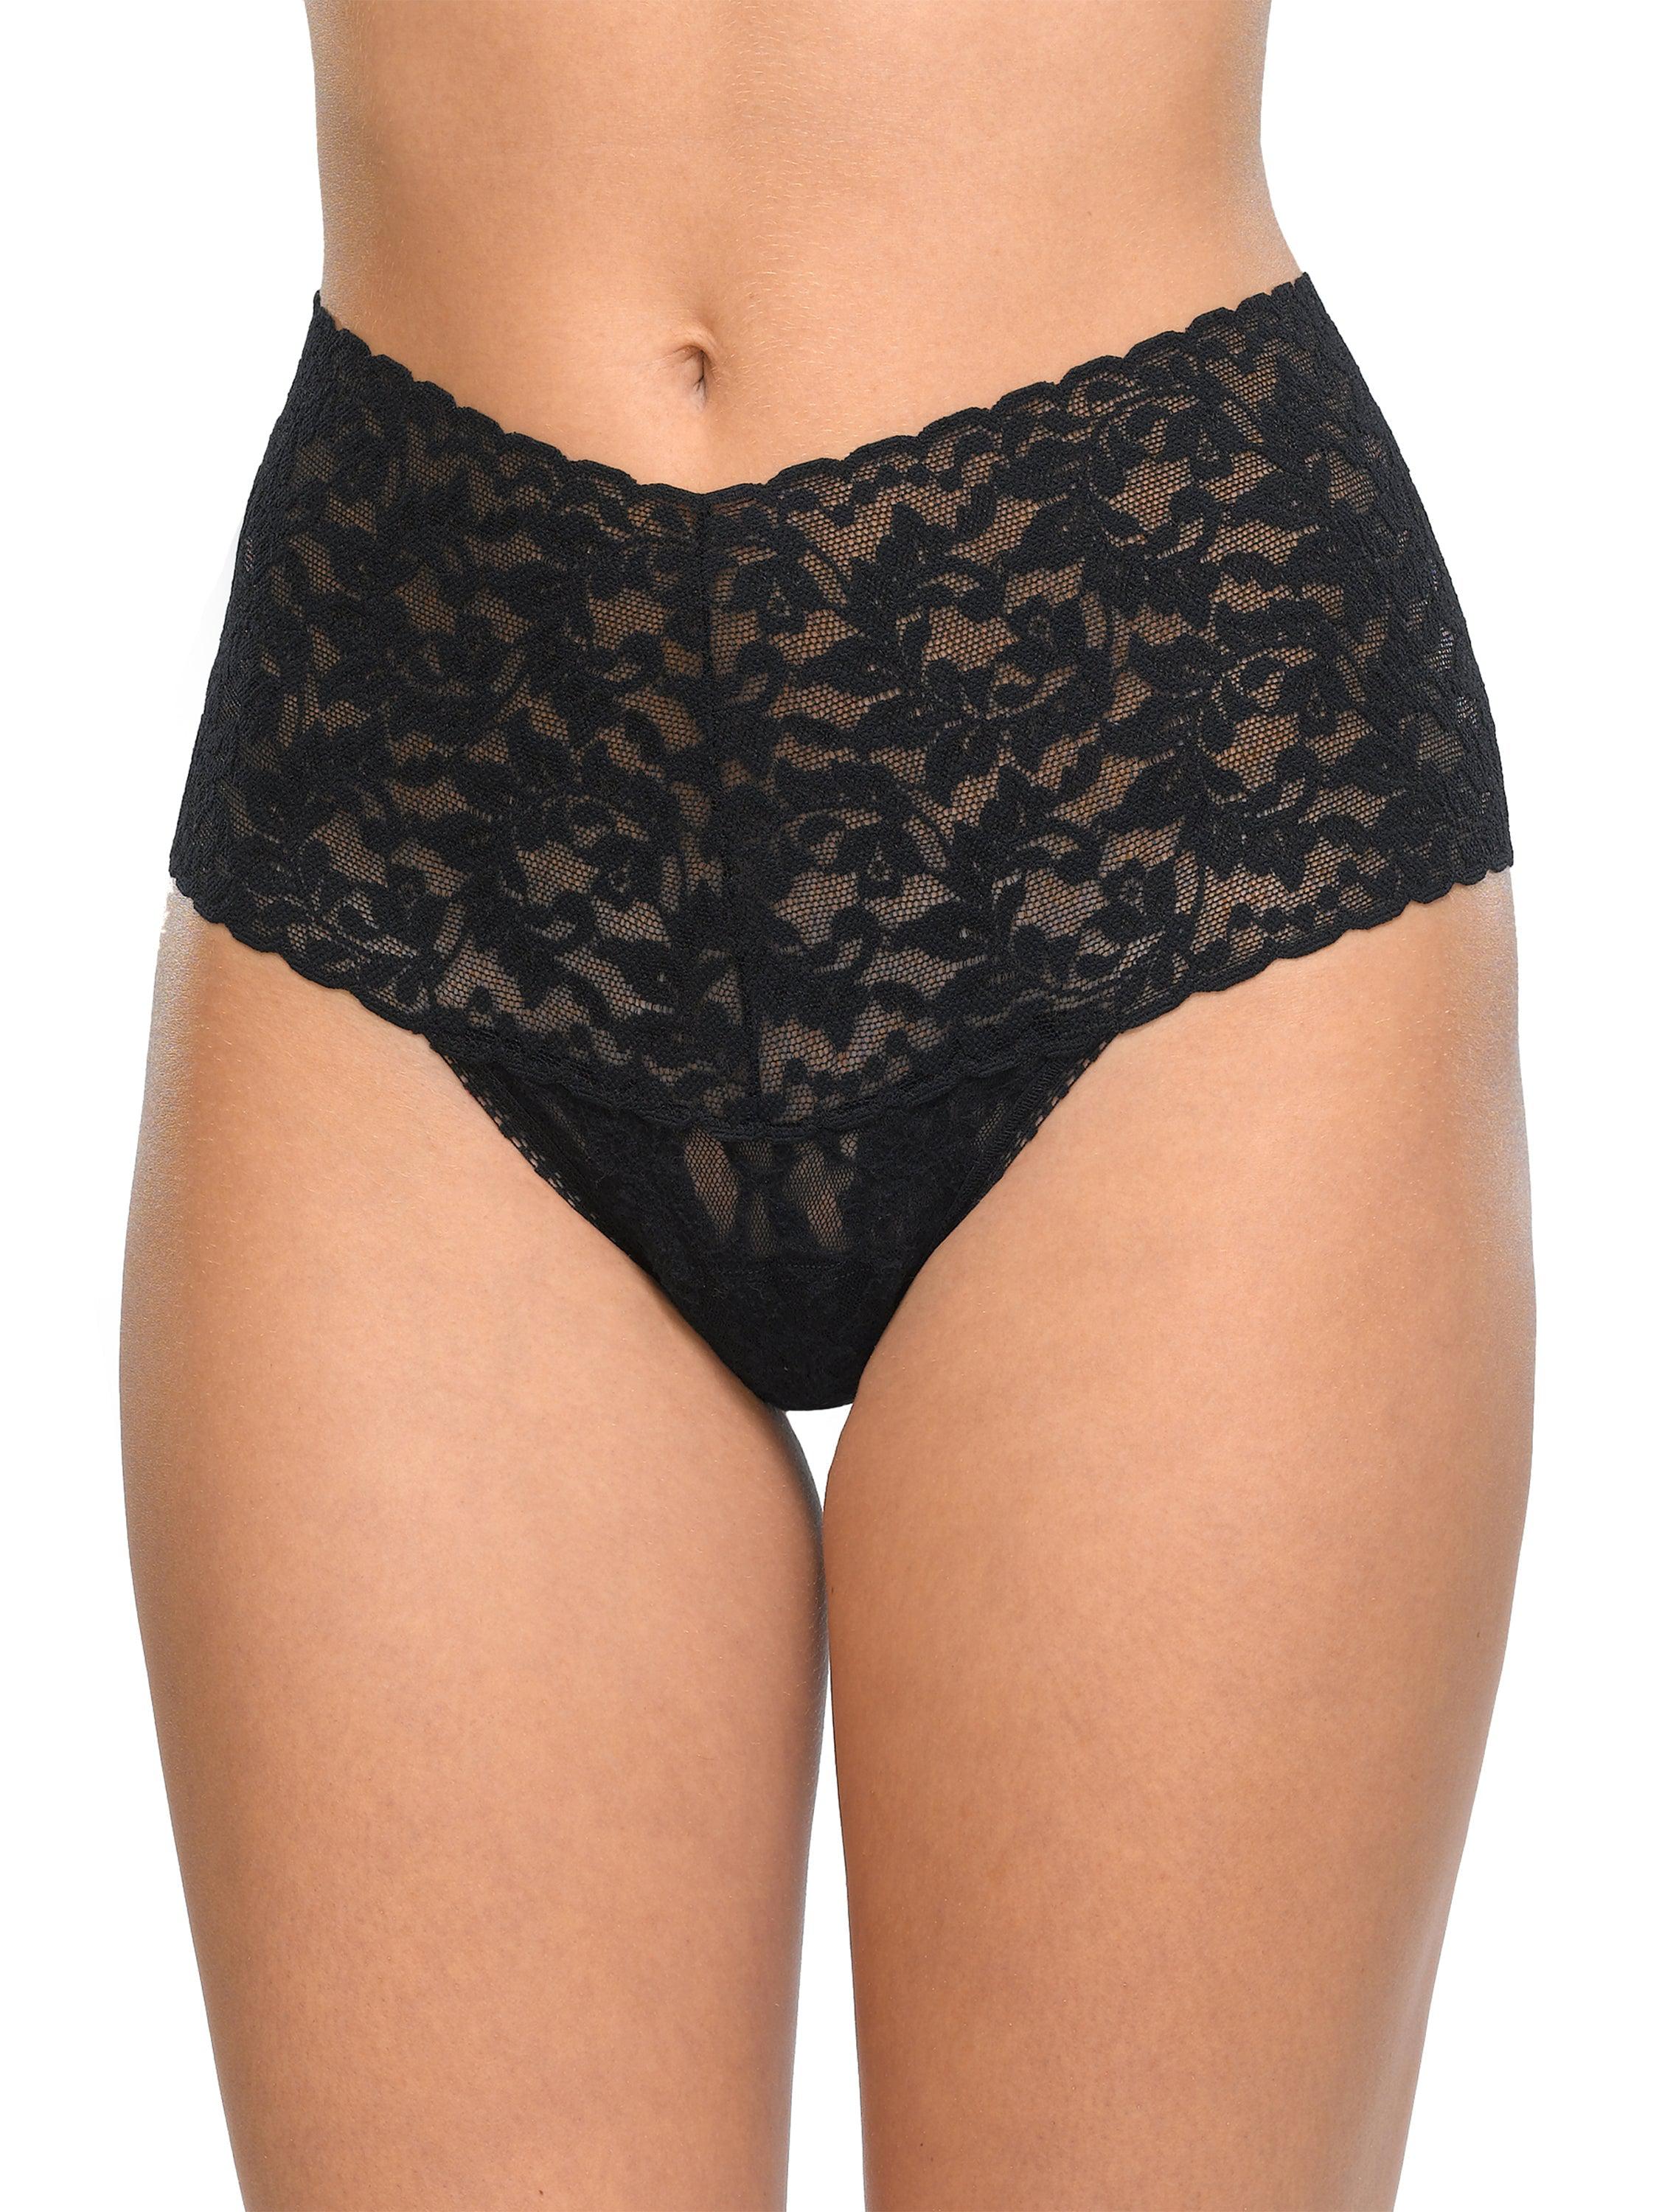  hanky panky Signature Lace Printed Retro Thong One